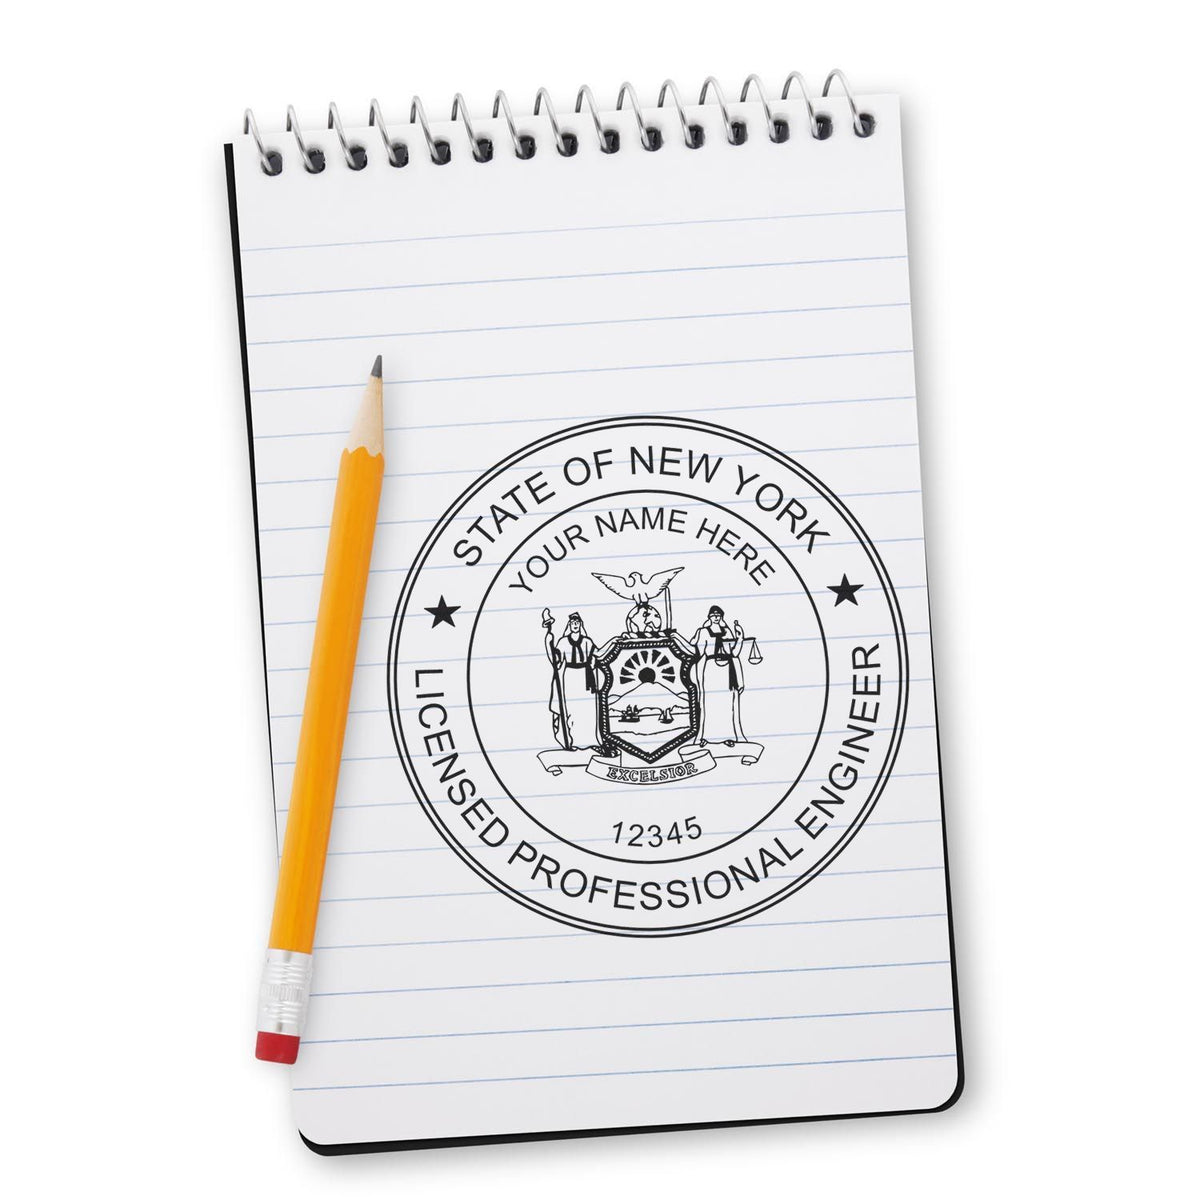 This paper is stamped with a sample imprint of the New York Professional Engineer Seal Stamp, signifying its quality and reliability.